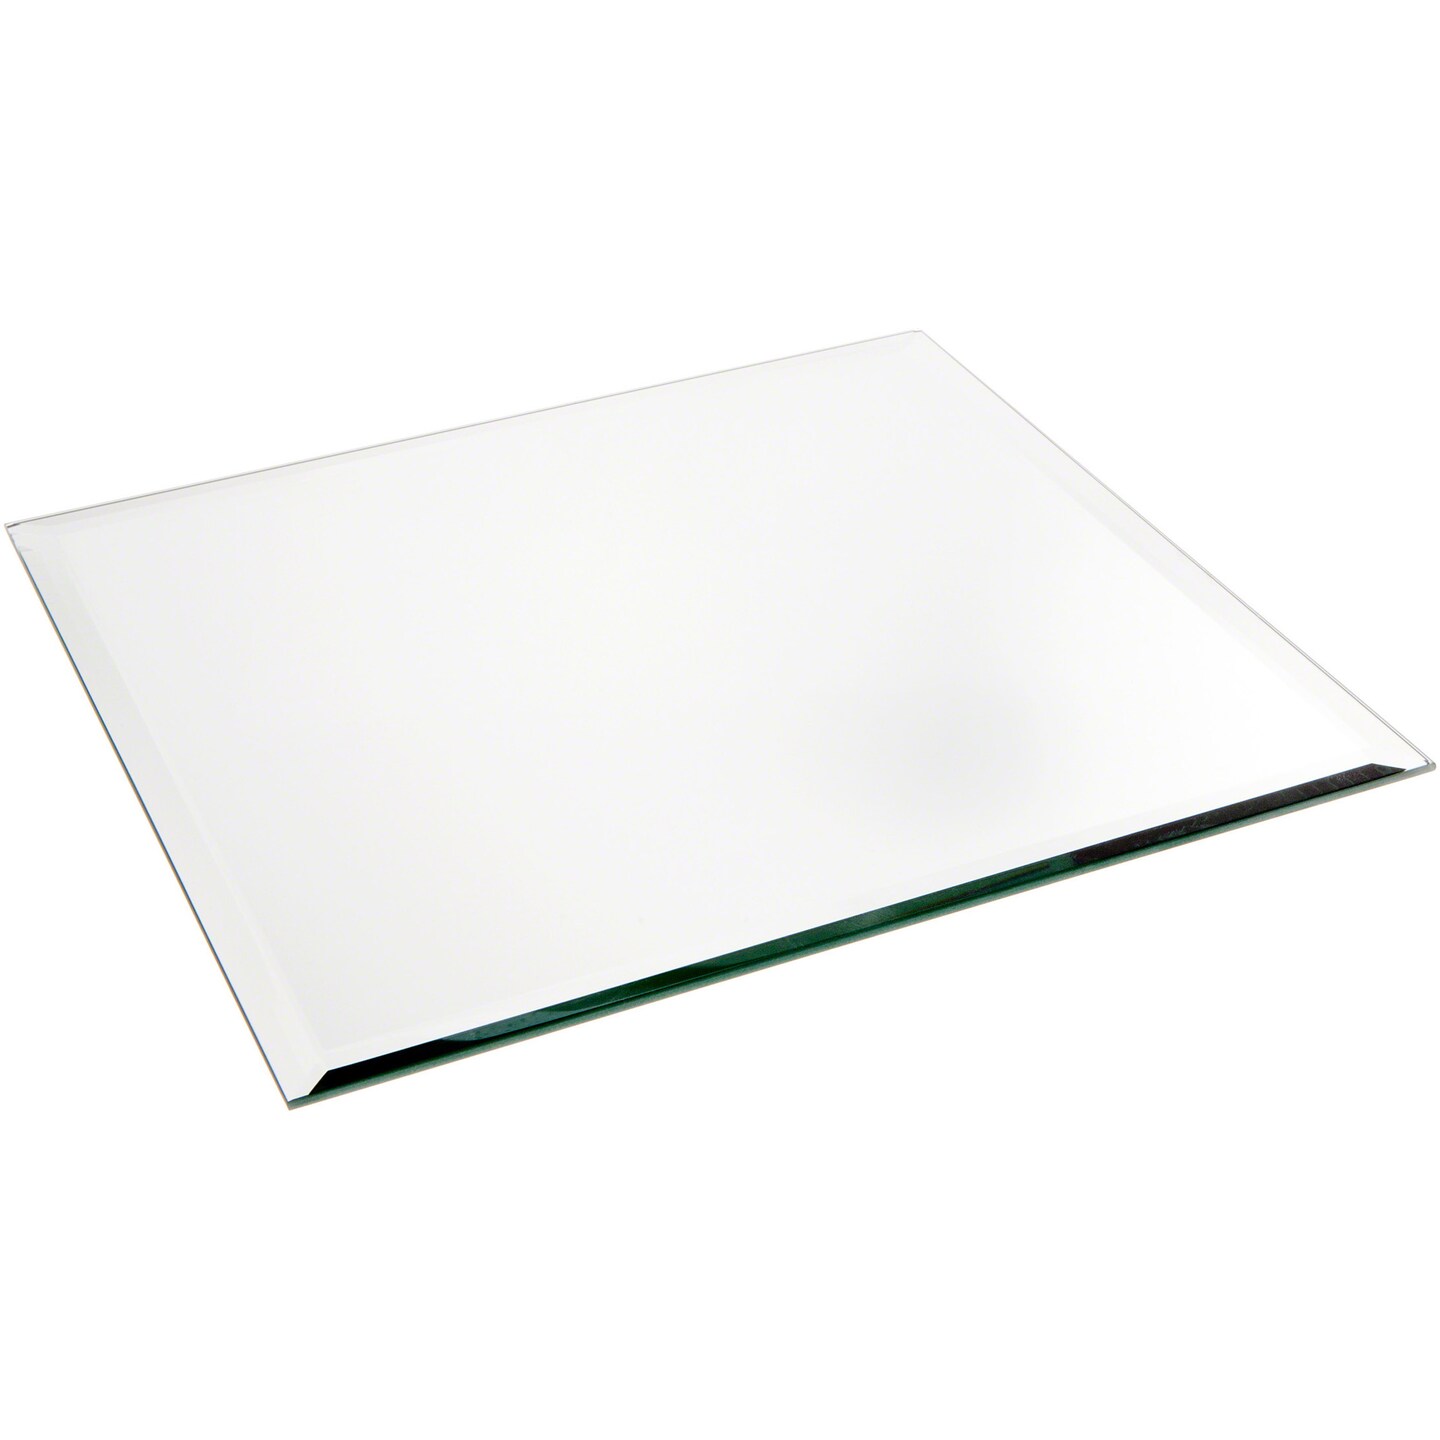 Plymor 8 x 12 inch Rectangle 5mm Beveled Glass Mirror.